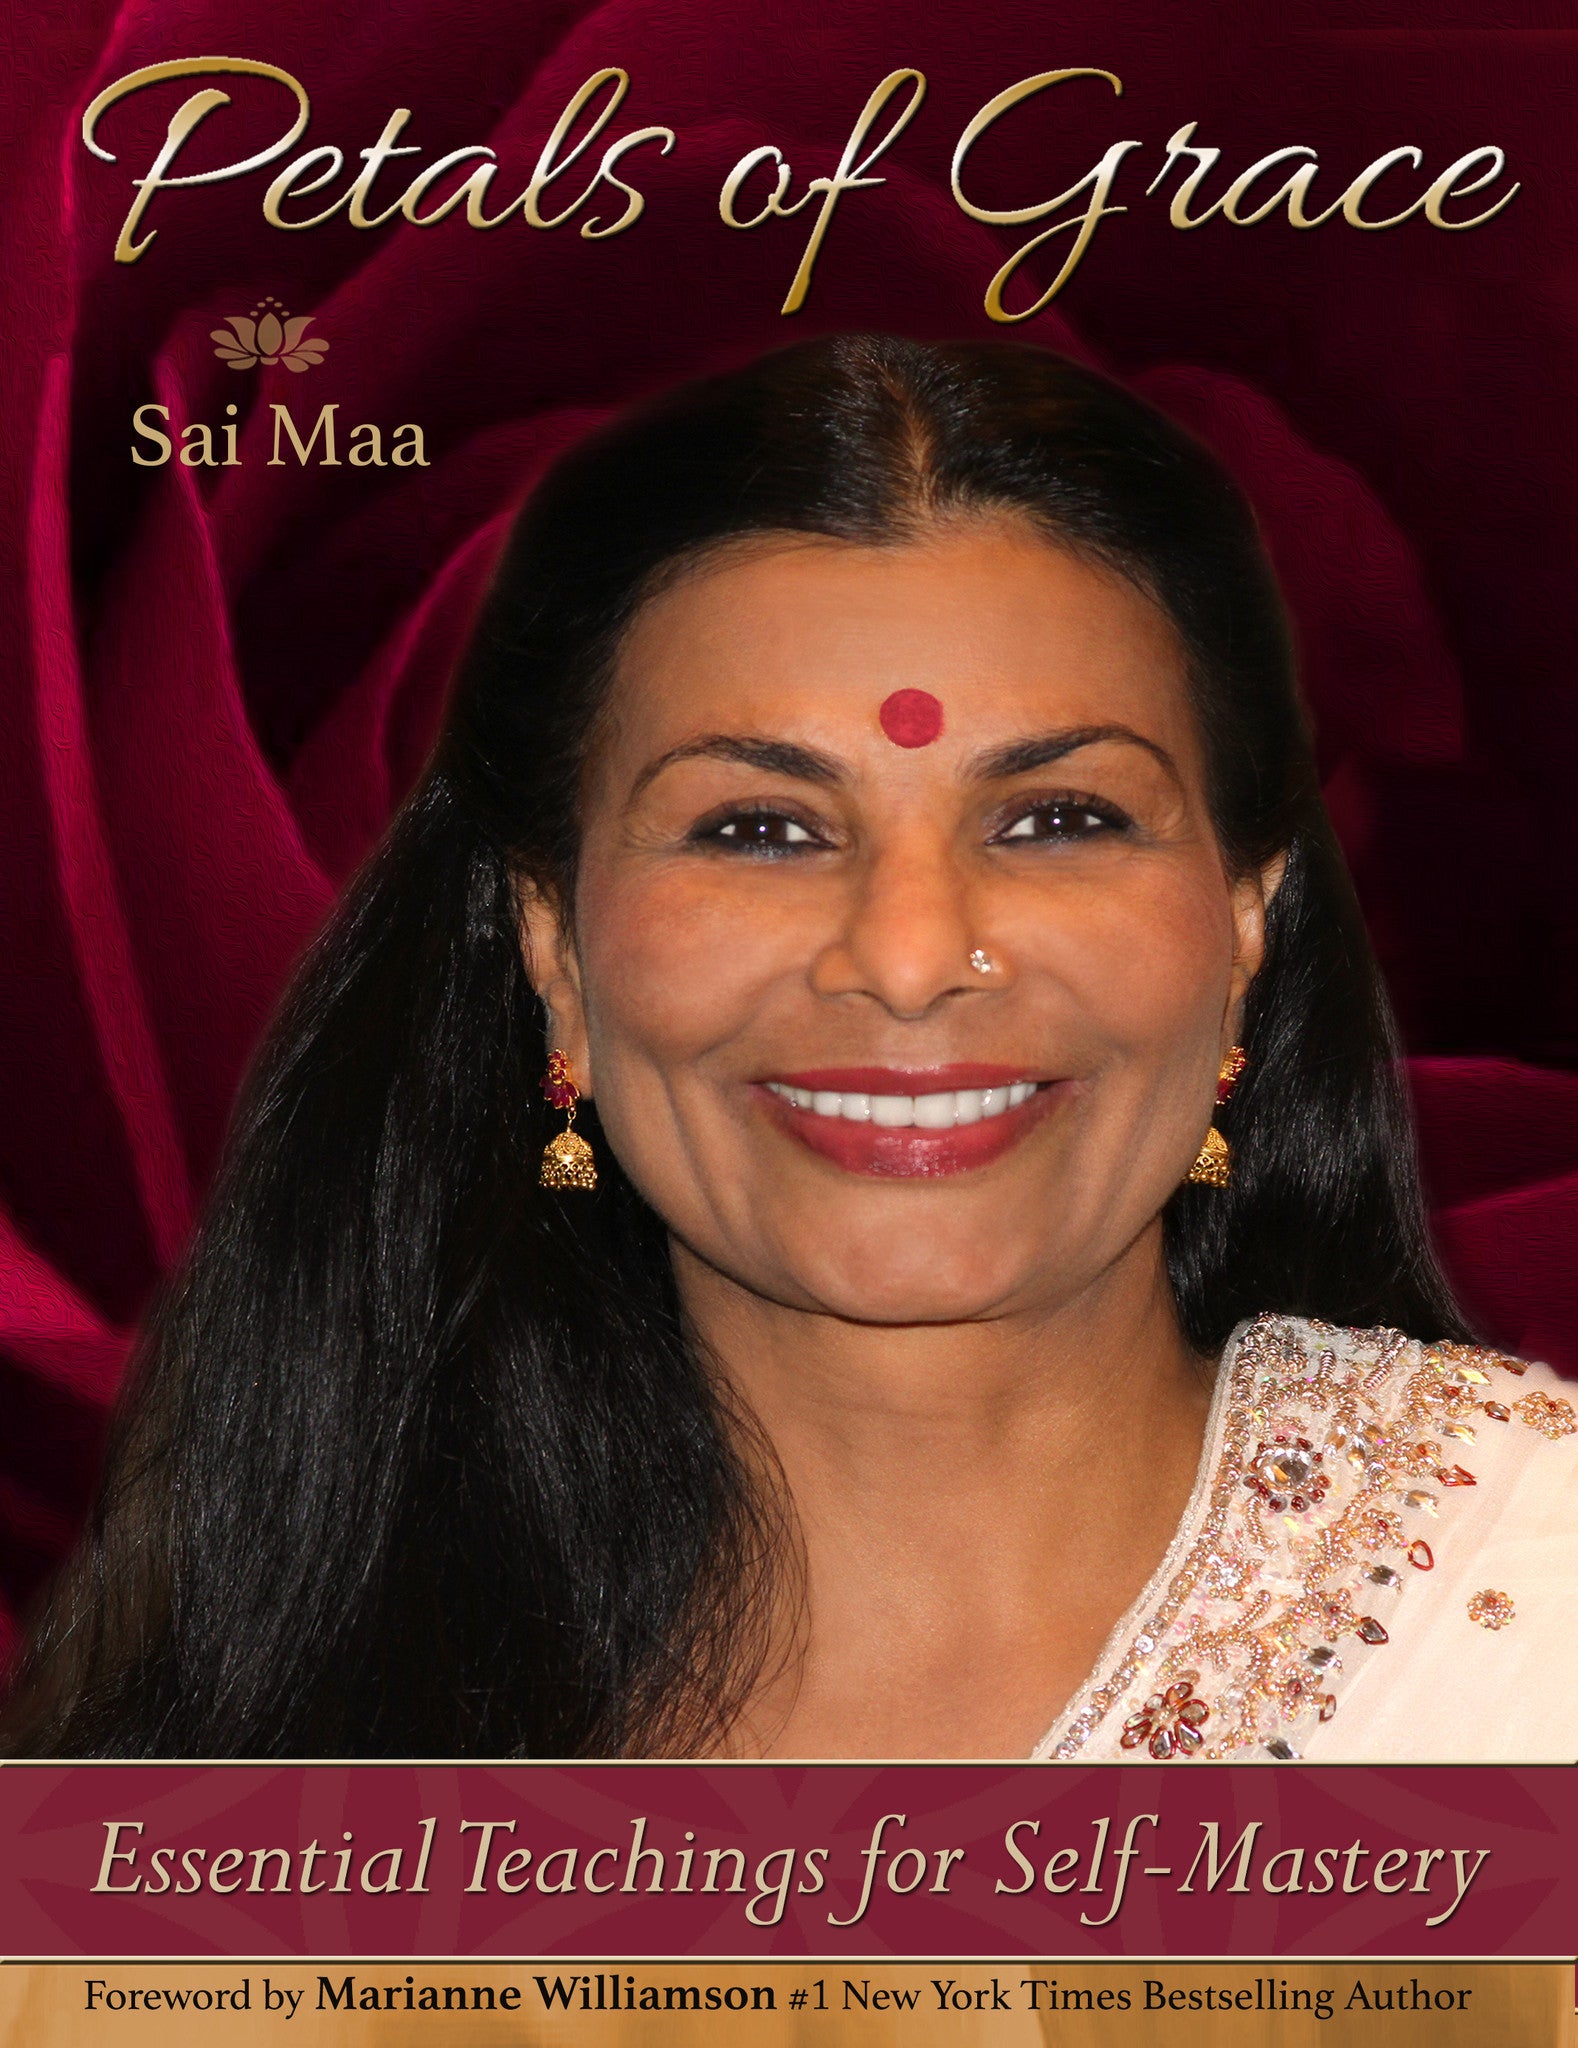 Petals of Grace: Essential Teachings for Self-Mastery